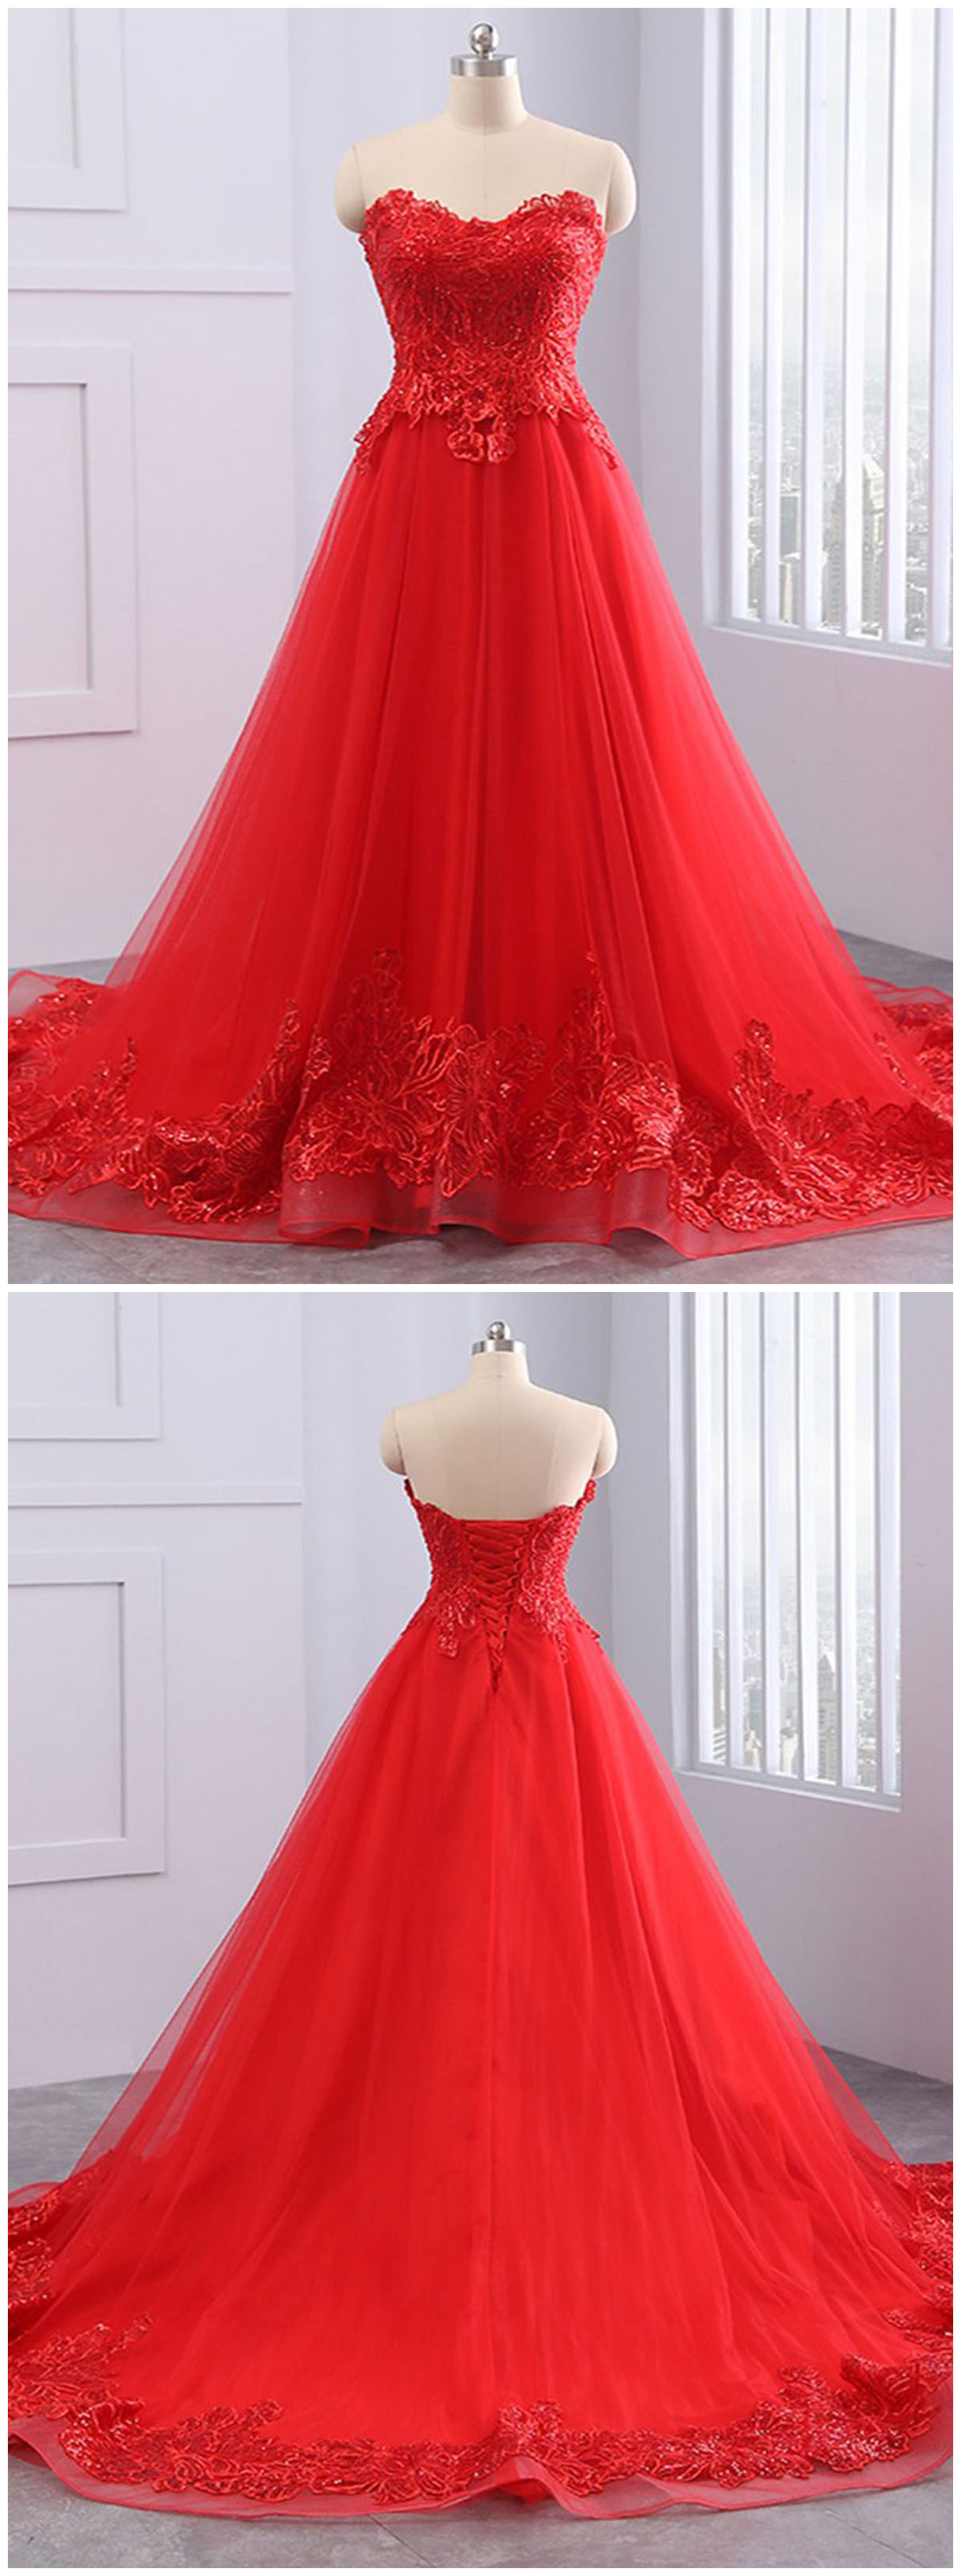 Red Tulle Strapless Long A-line Customize Lace Evening Dress, Prom Dress